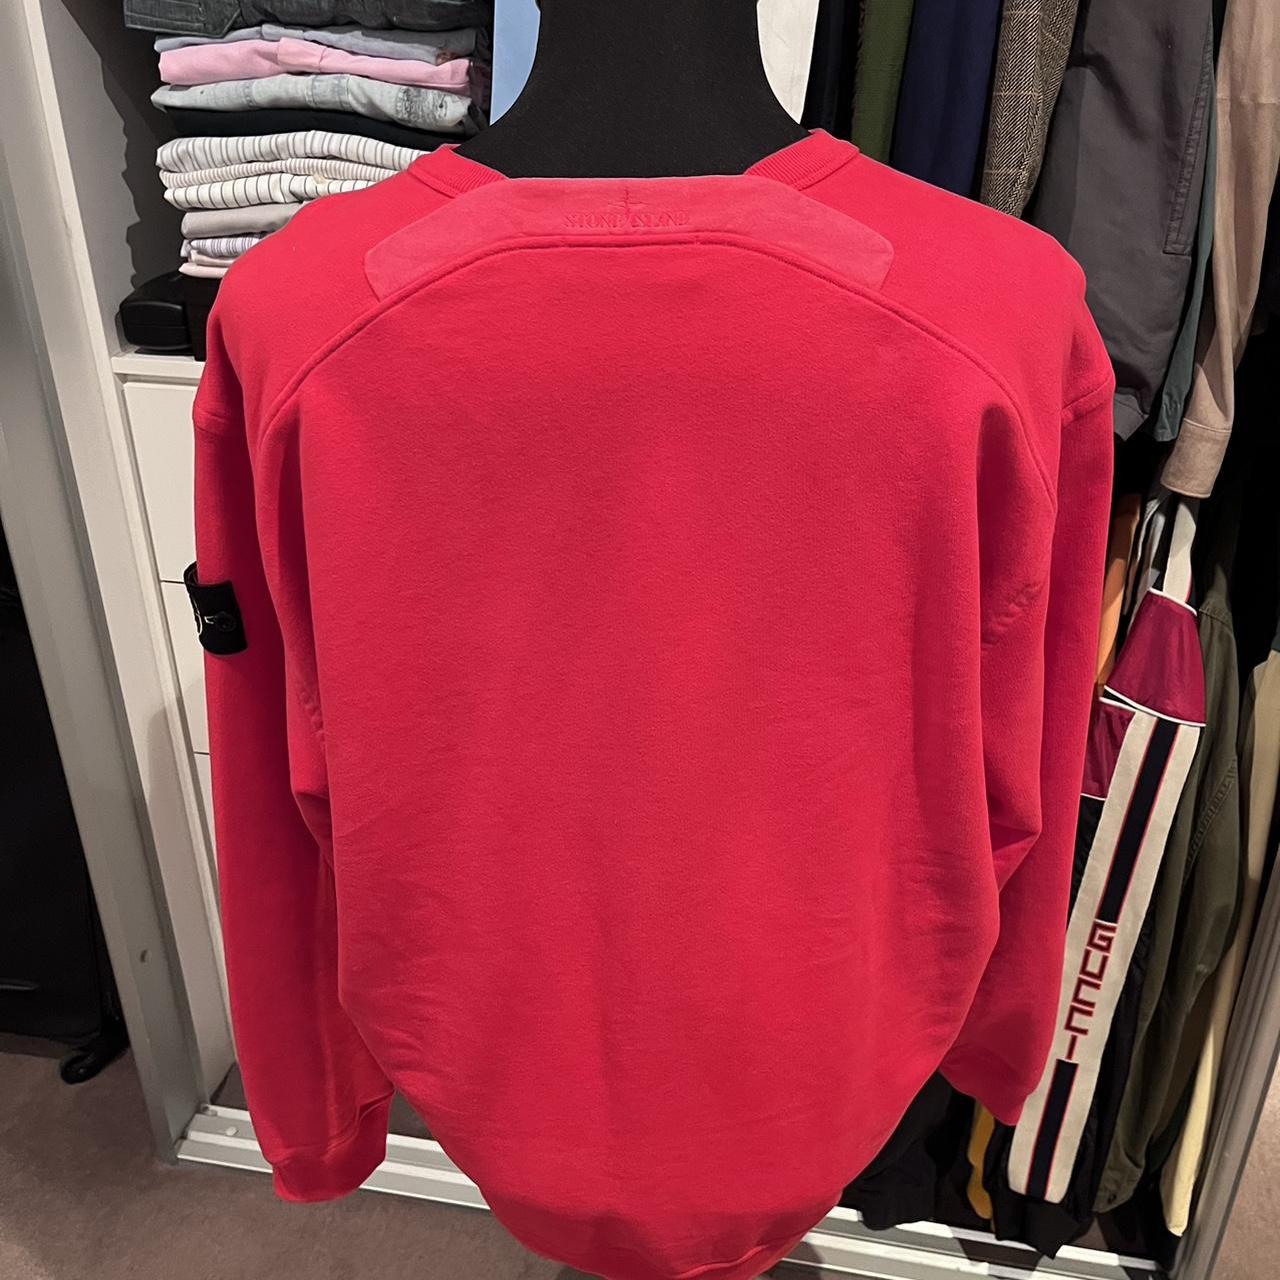 Stone Island Red 100% Cotton Fleece Sweater Size XL with Logo Badge